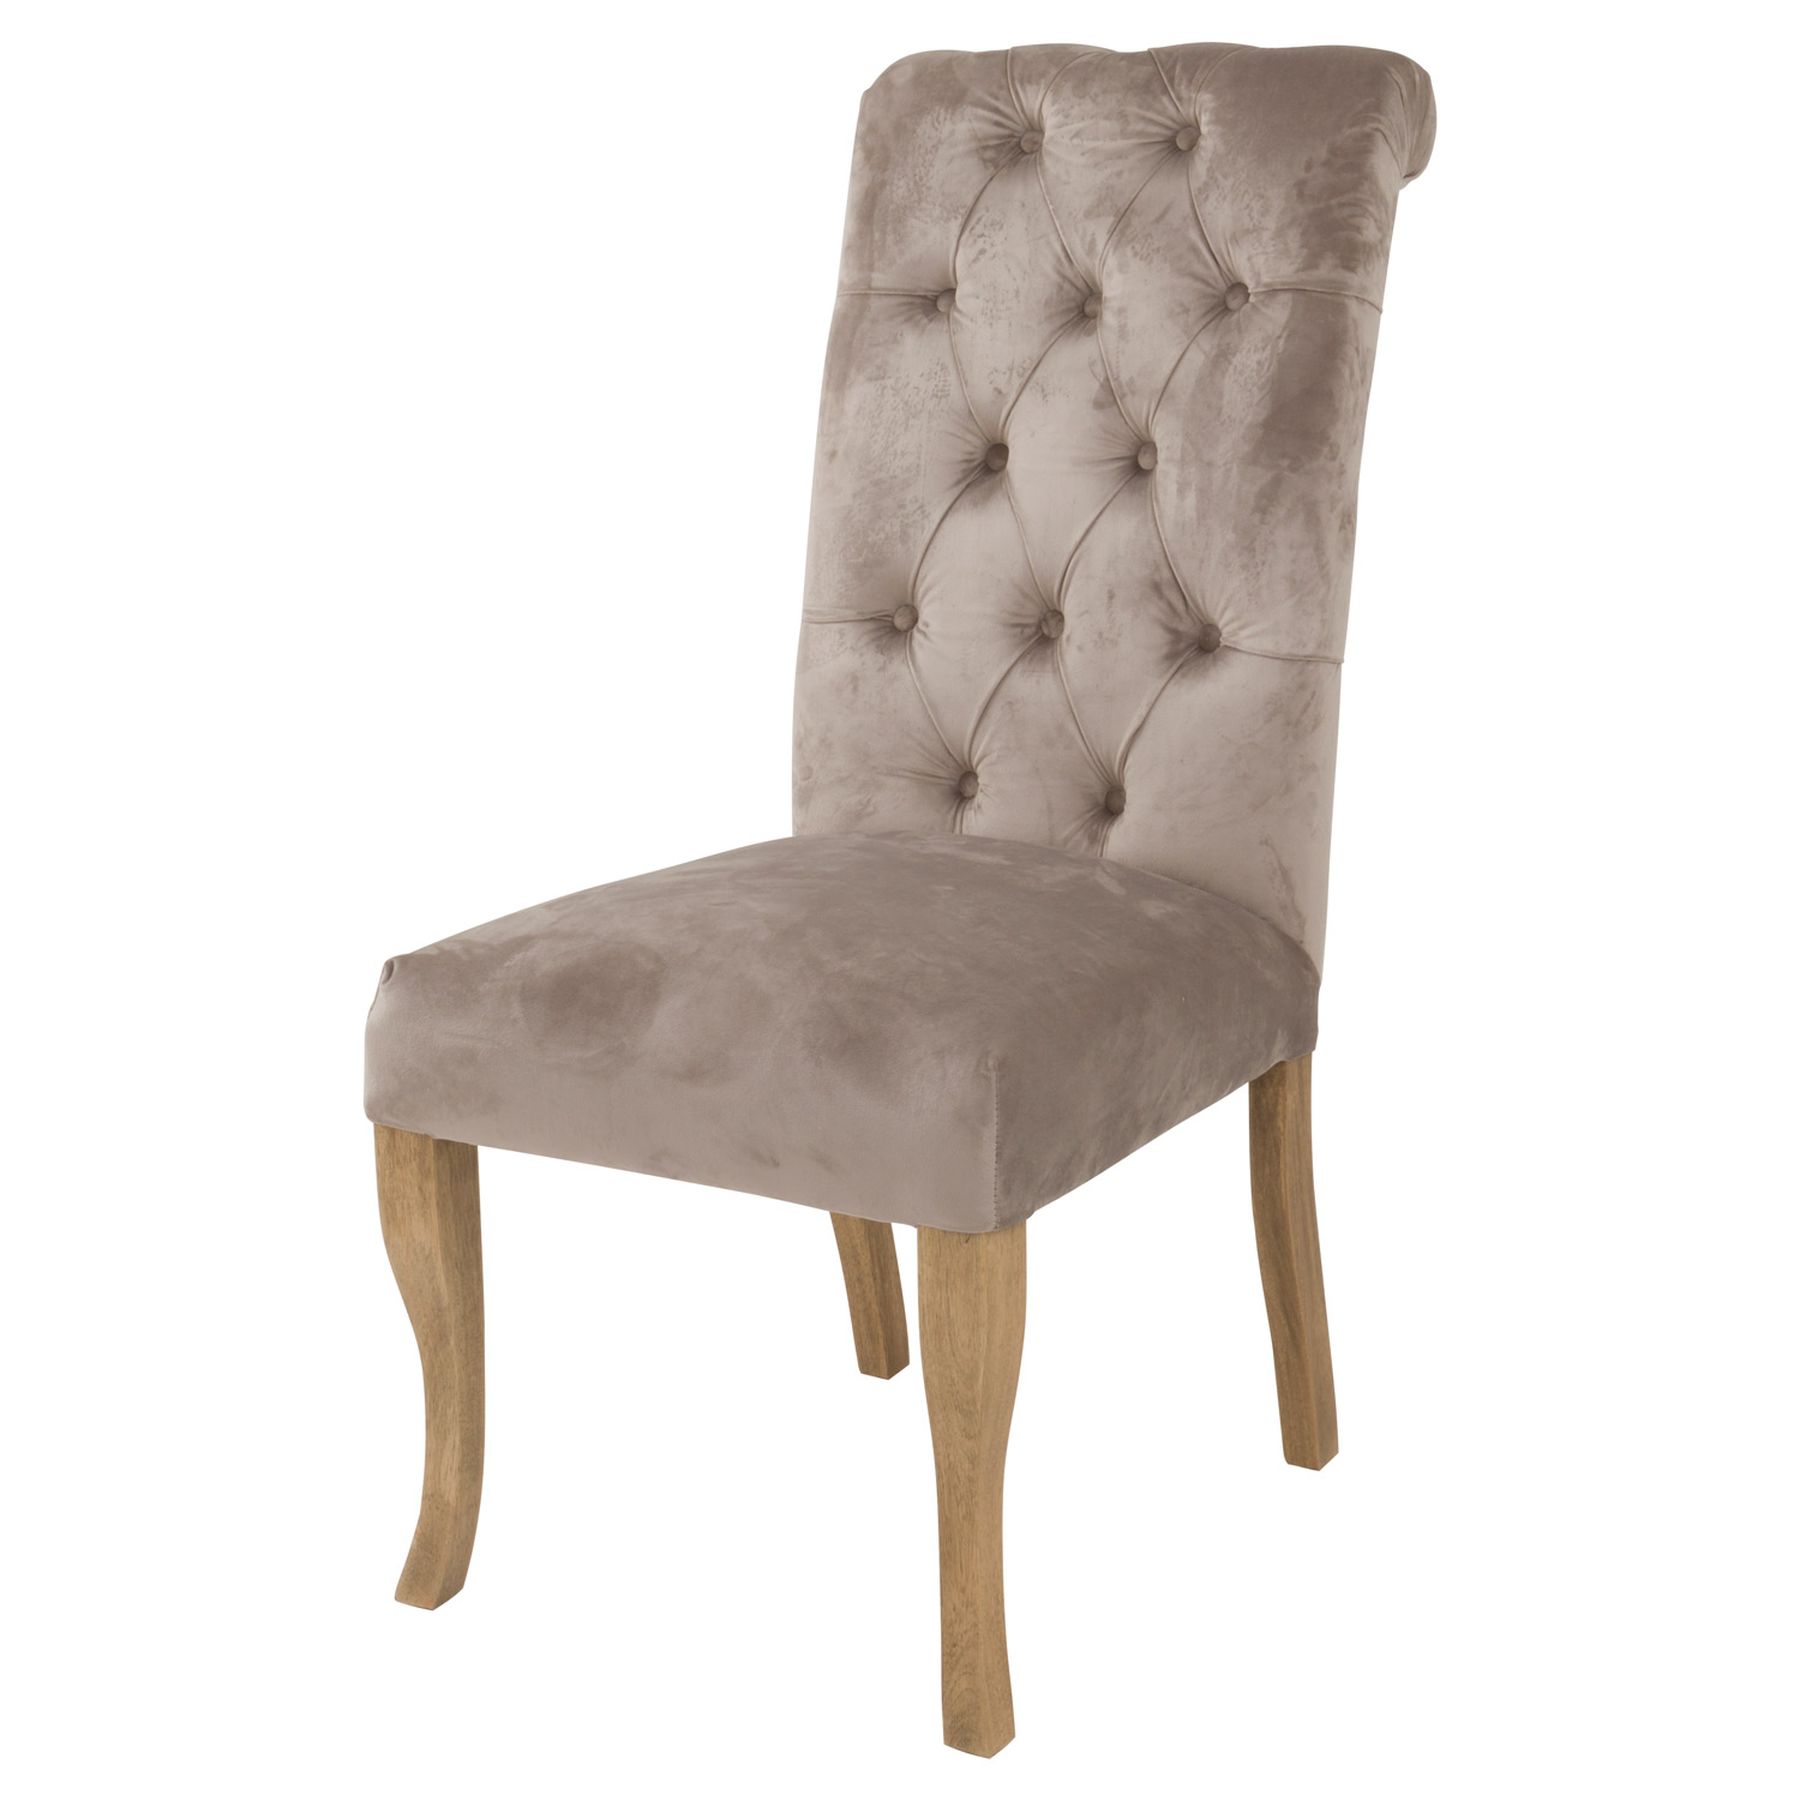 Chelsea Roll Top Dining Chair - Image 1